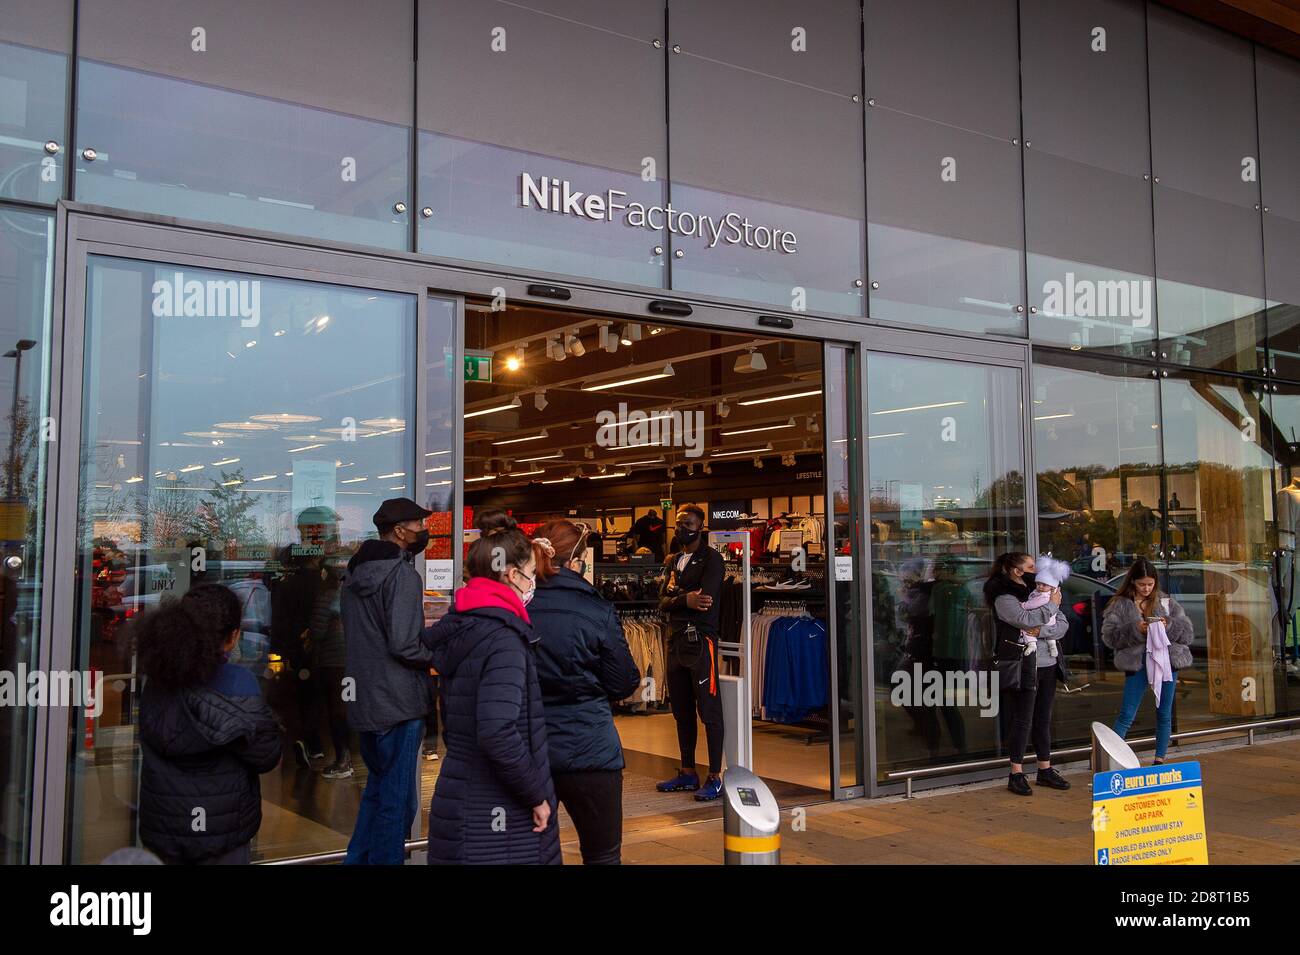 nike outlet store uk